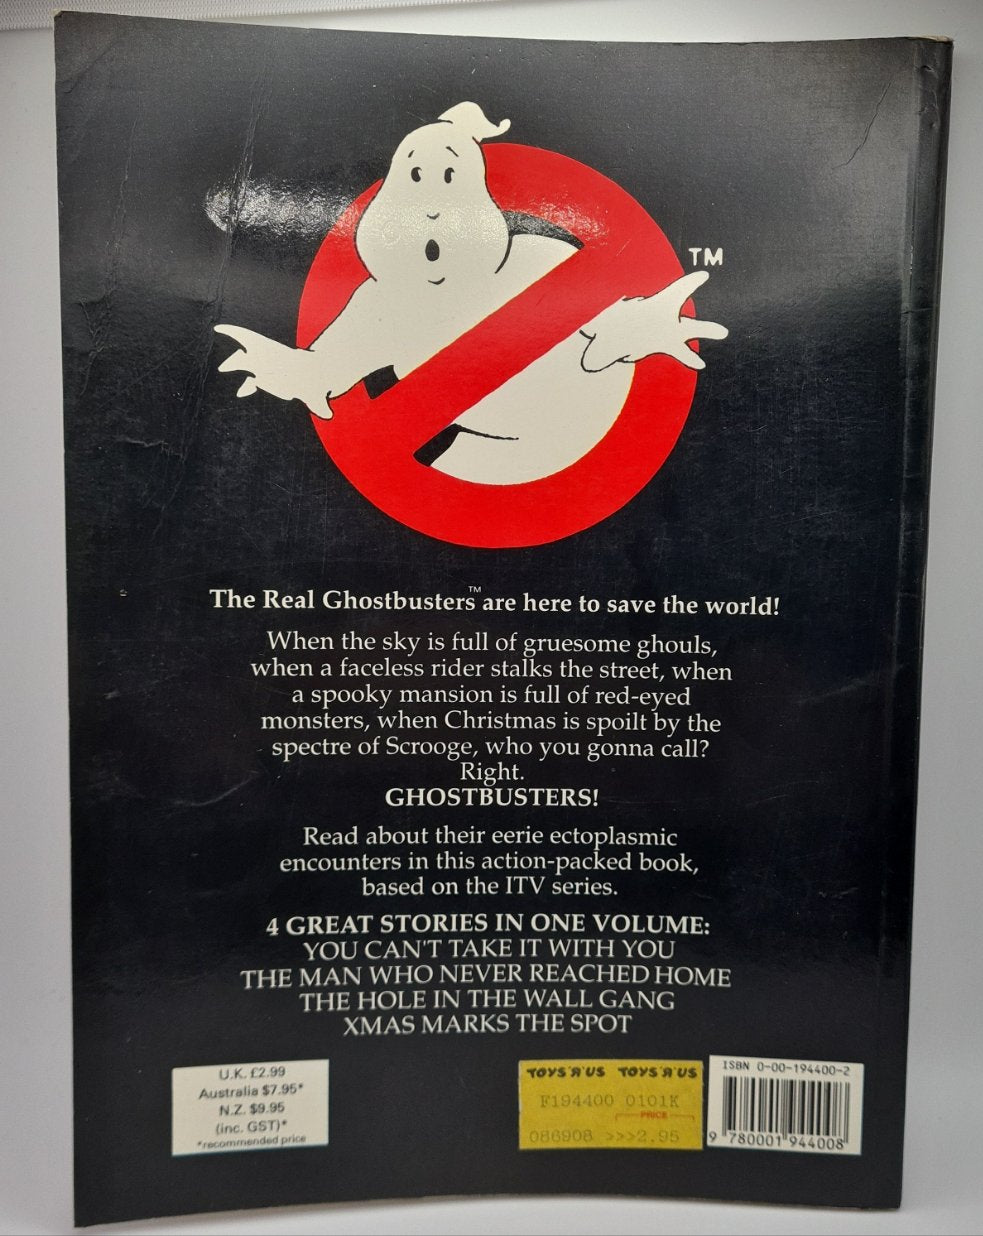 The Real Ghostbusters Story Book 1989 Used